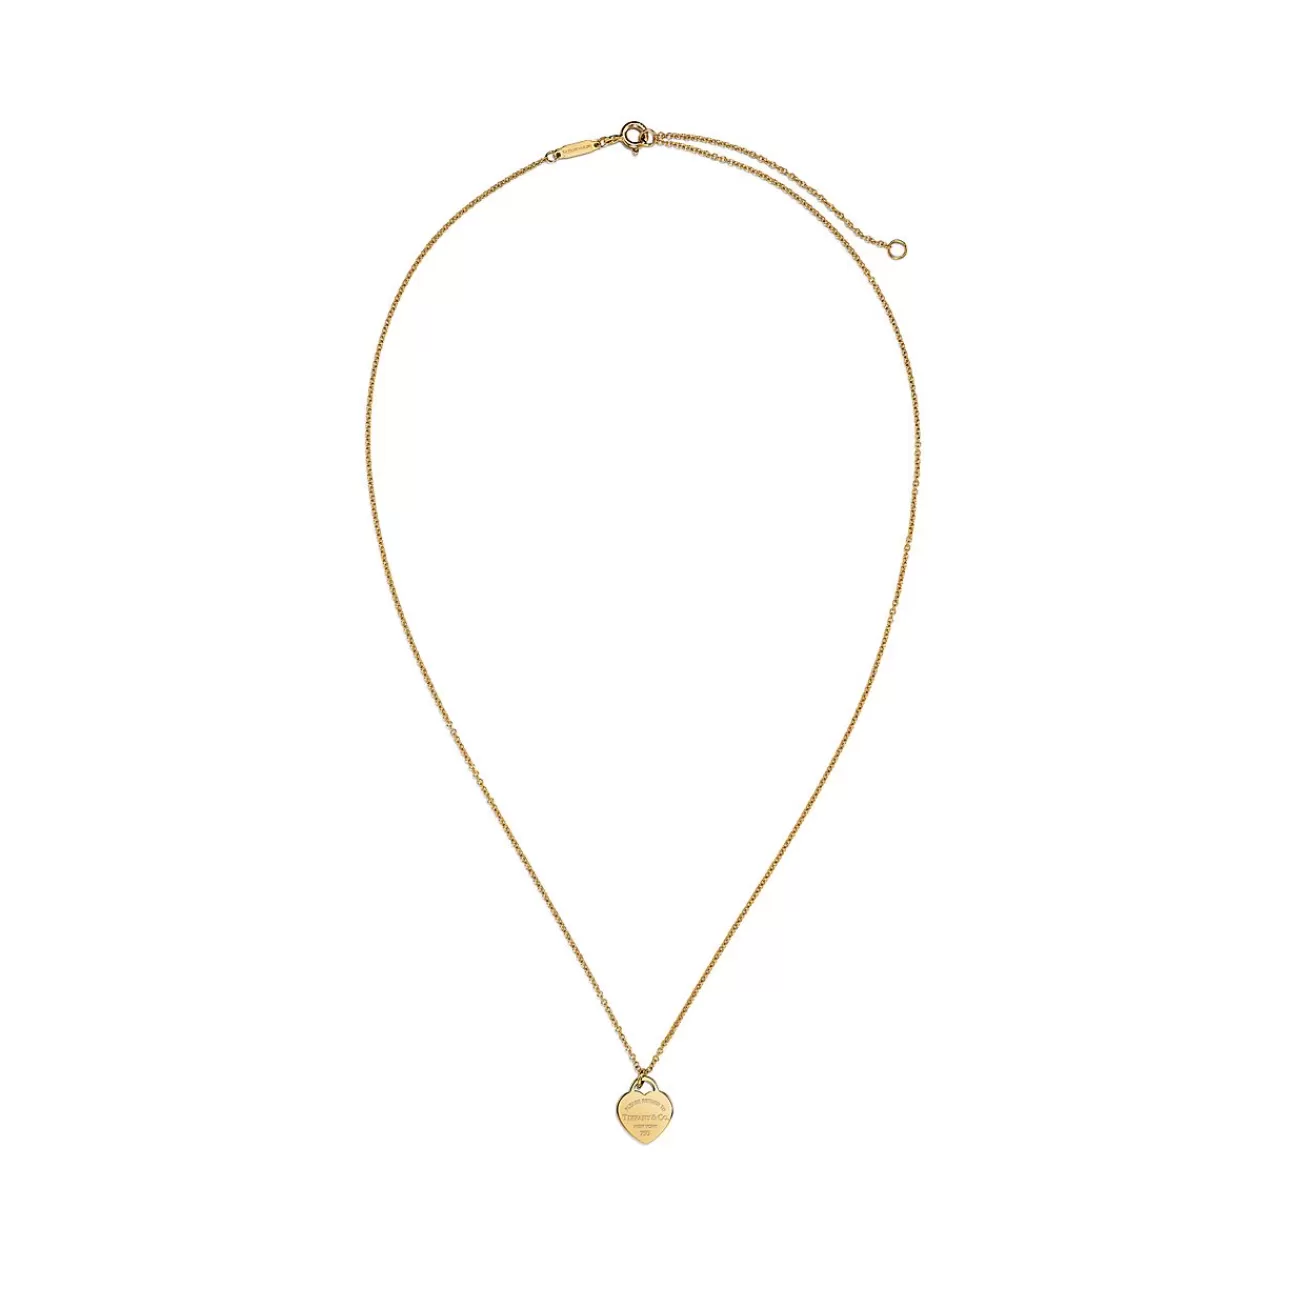 Tiffany & Co. Return to Tiffany® Mini Heart Tag Pendant in Yellow Gold | ^ Necklaces & Pendants | Gifts for Her